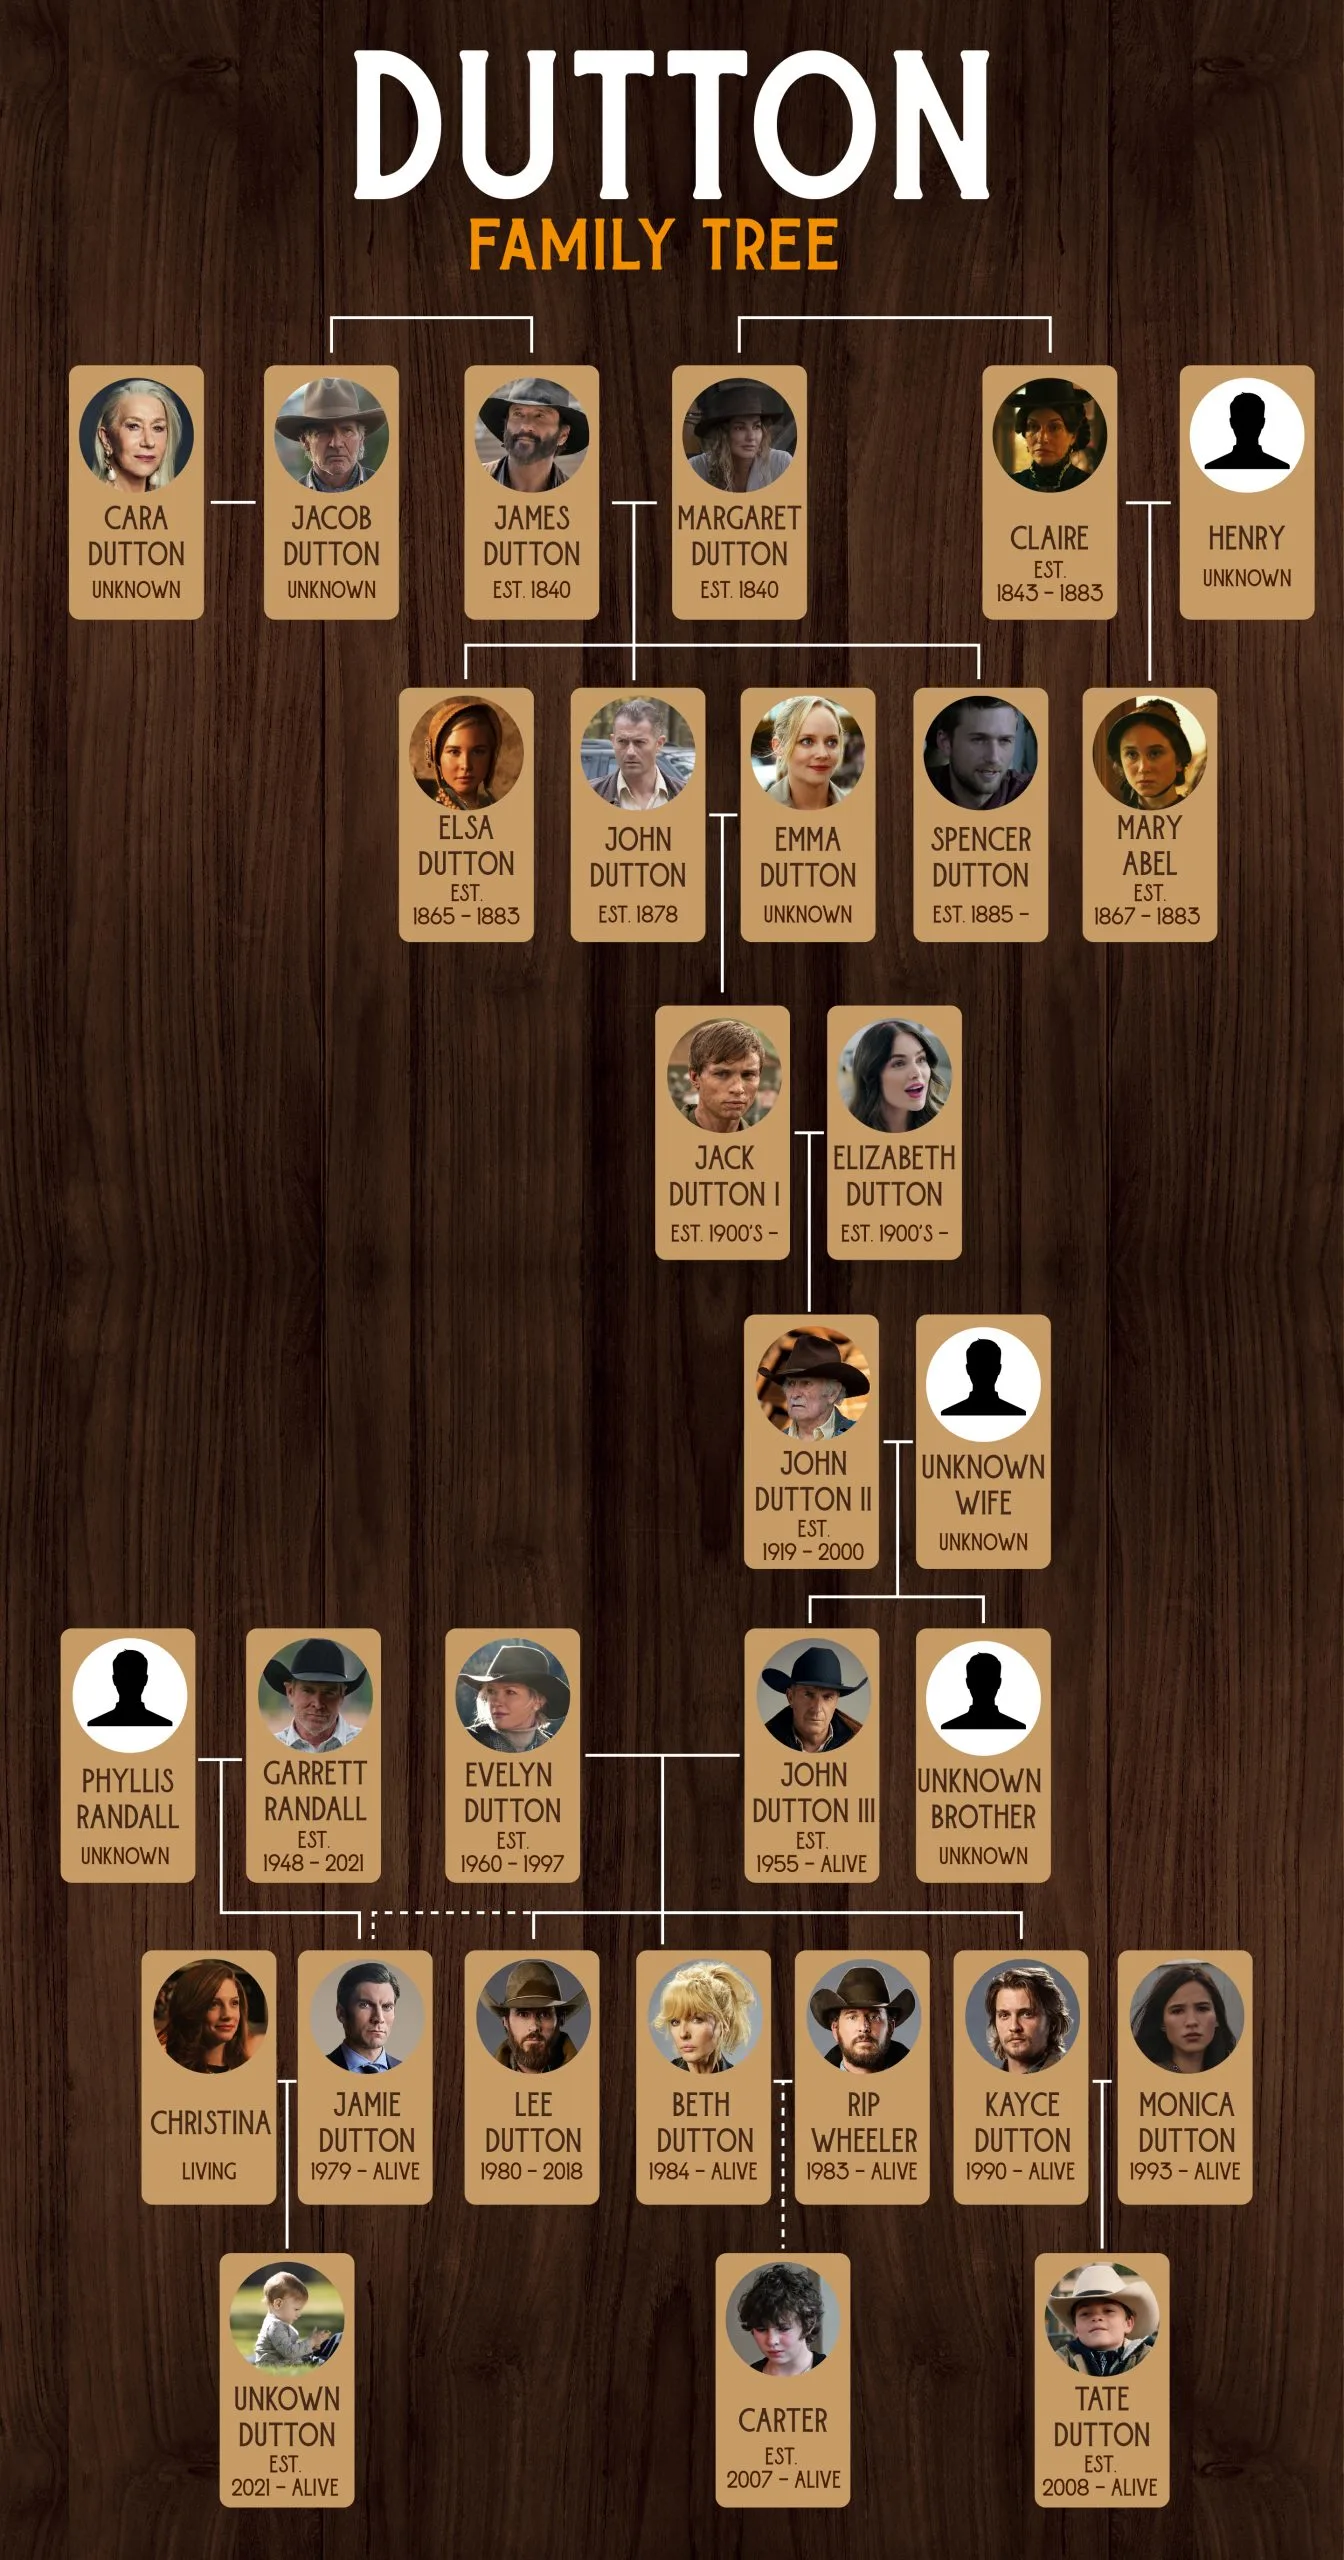 The Dutton Family Tree Infographic